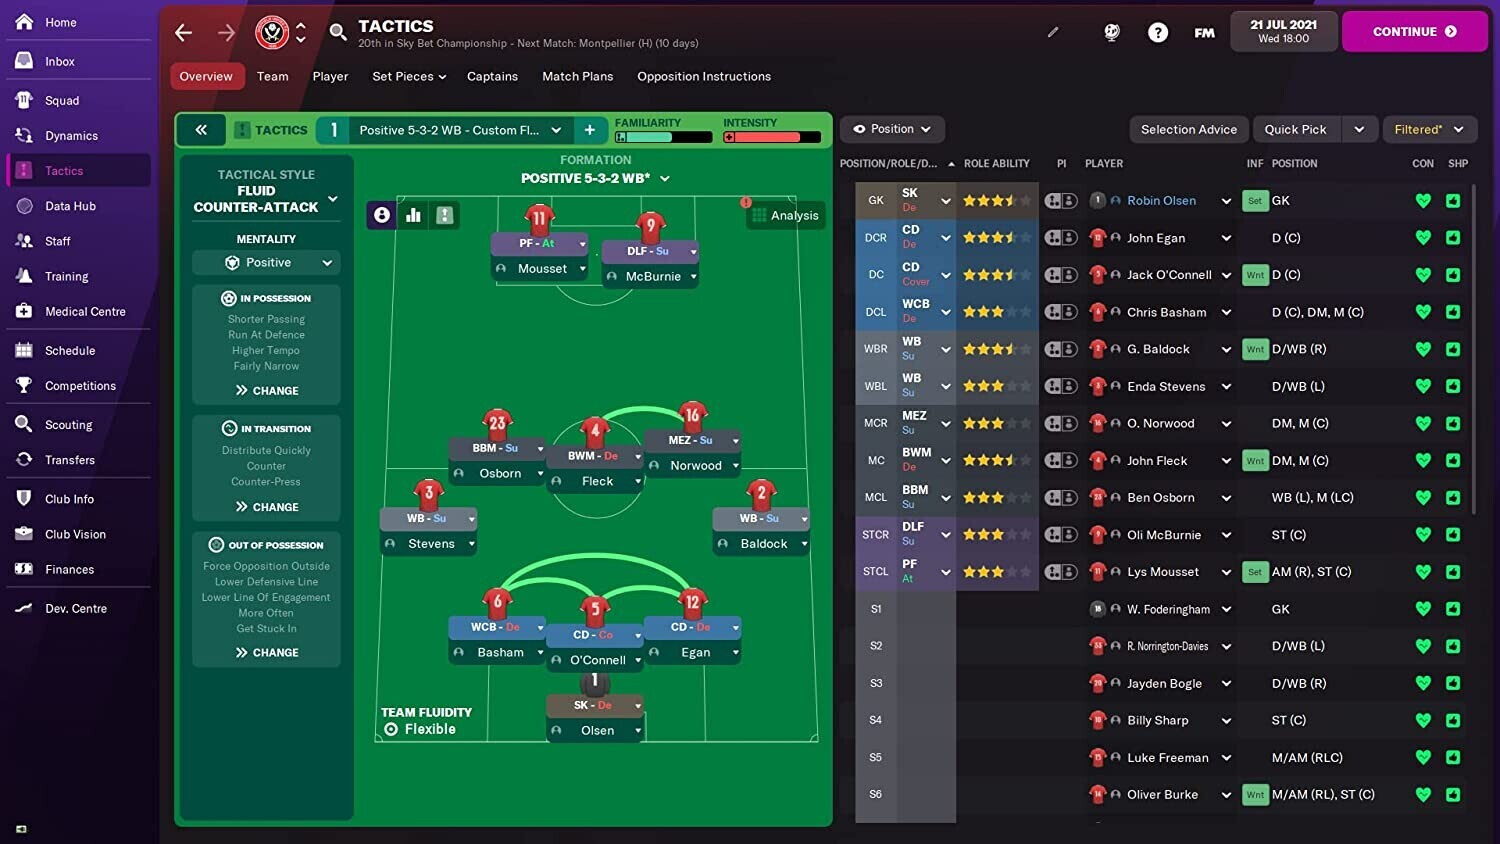 football manager 2022 xbox